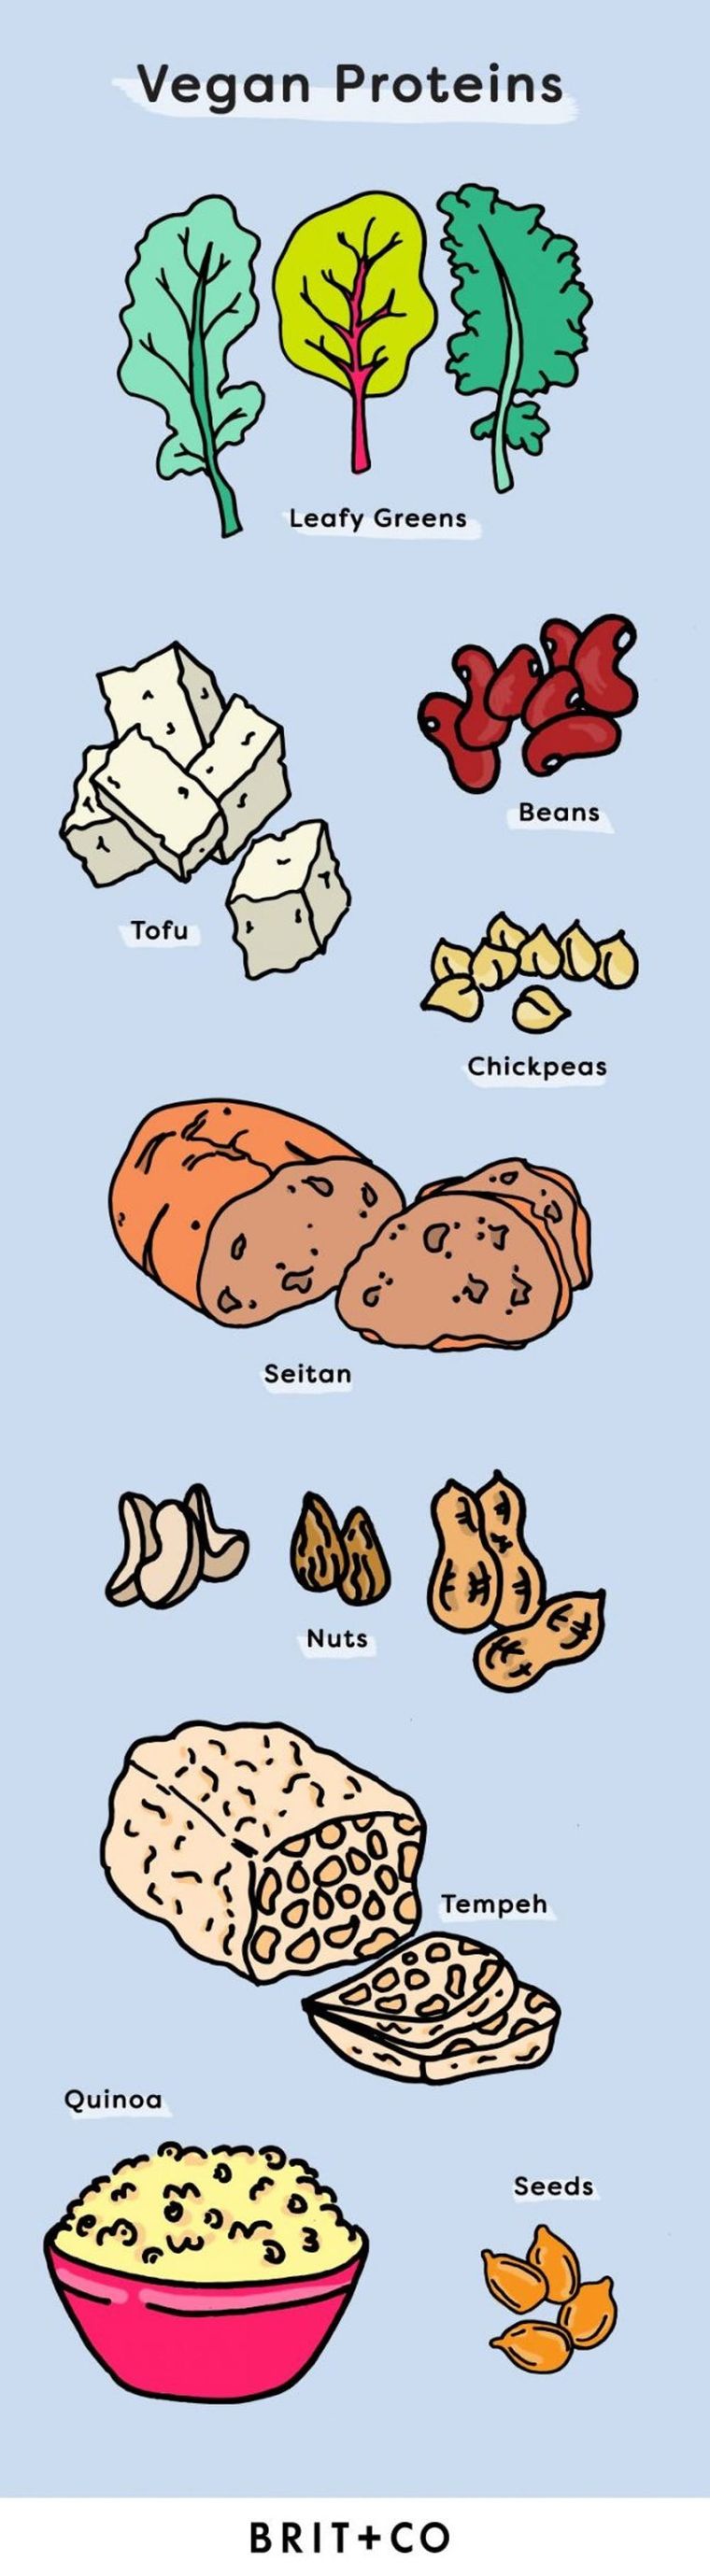 vegan protein sources chart